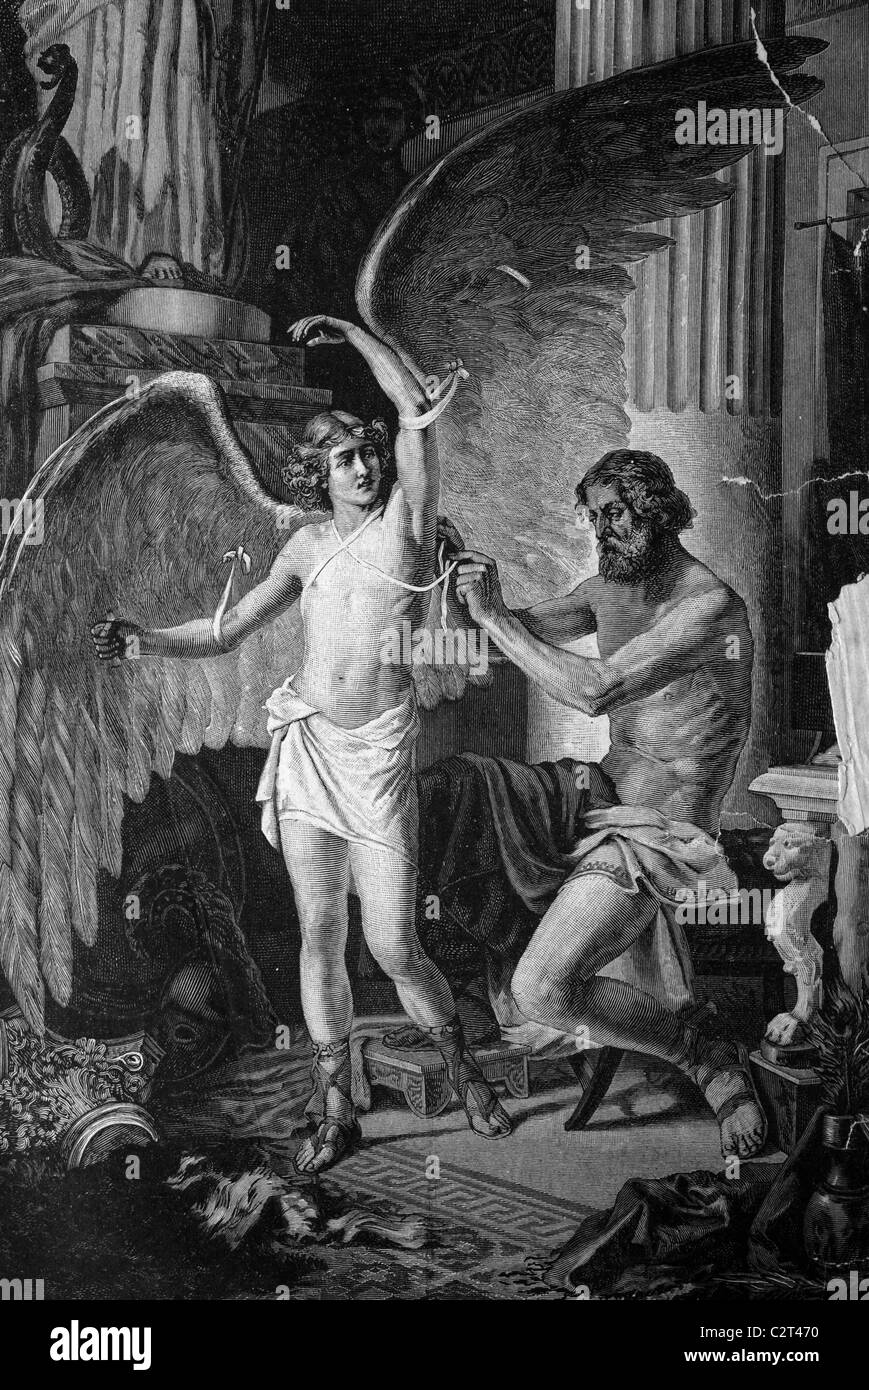 Greek mythology, Daedalus equipping his son Icarus with wings, historical illlustration, about 1886 Stock Photo